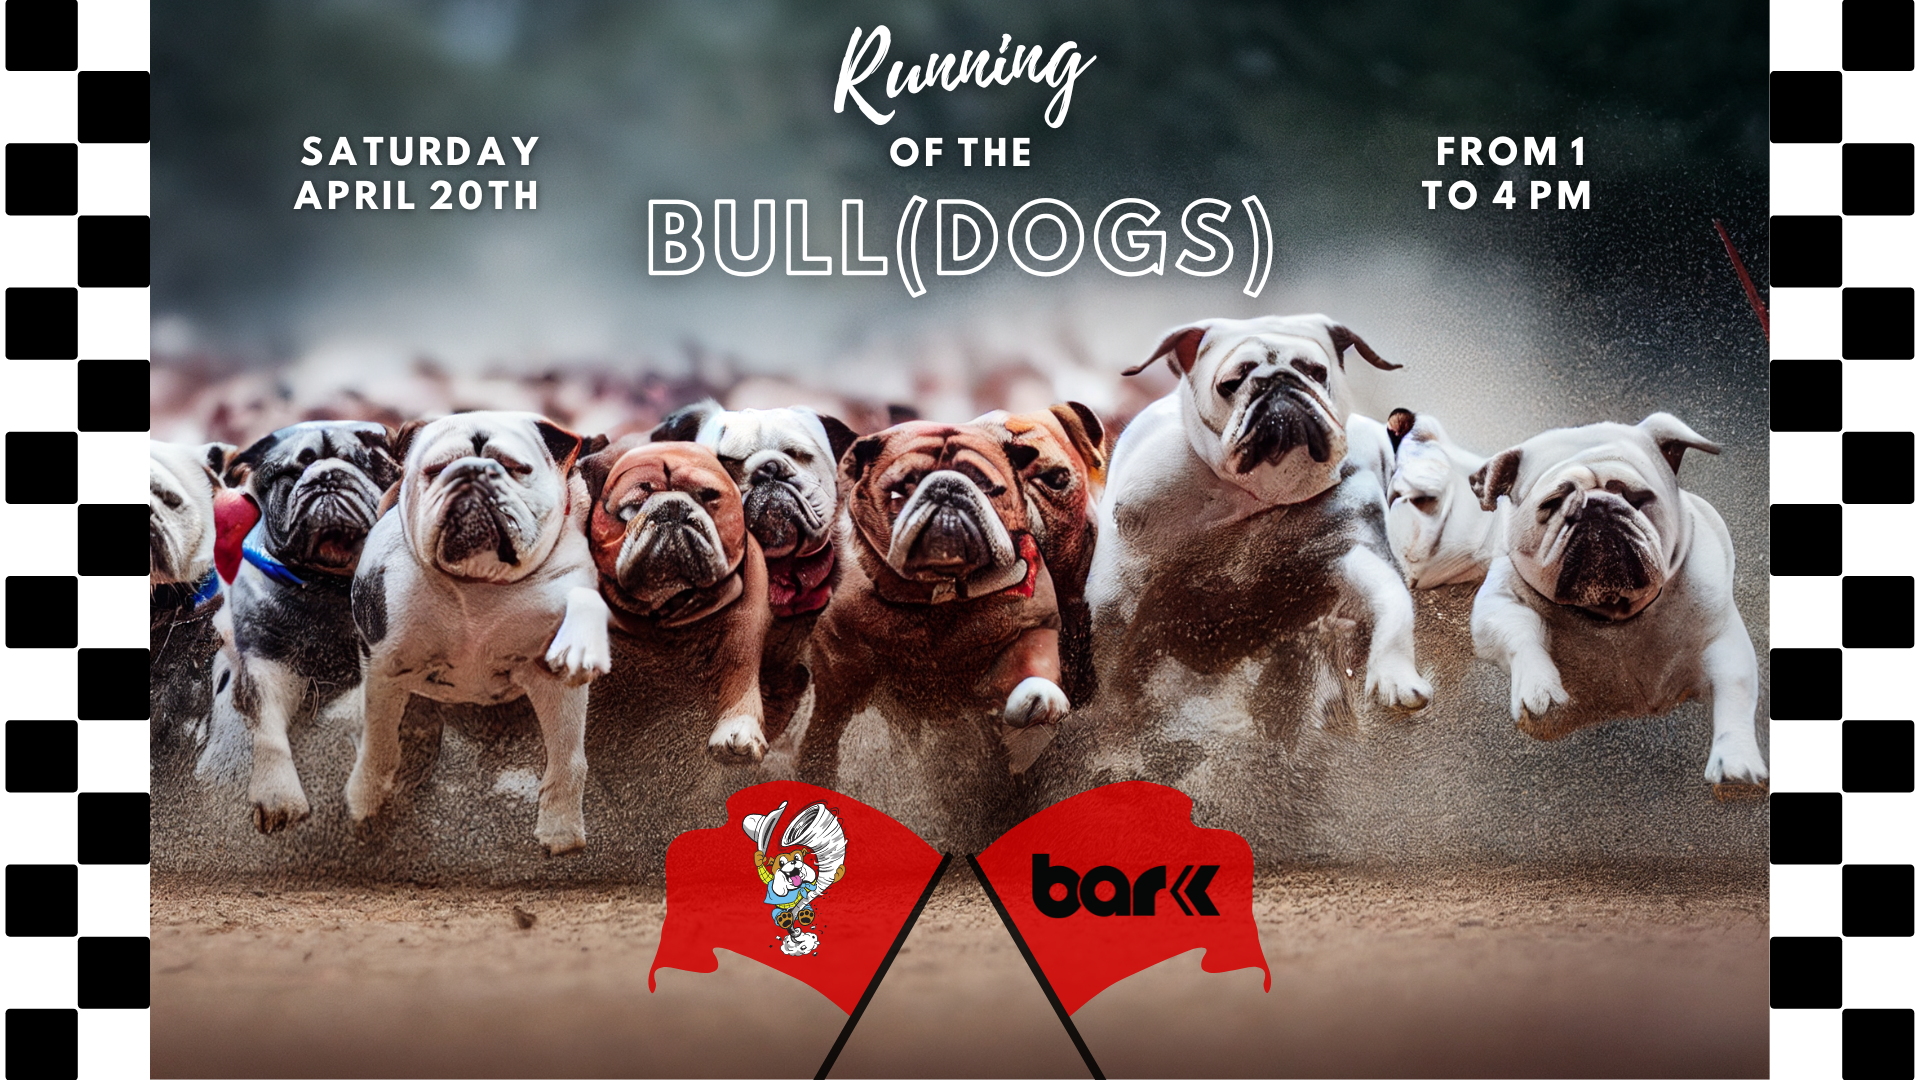 Bar K Running of the Bull(Dogs) on Saturday April 20th from 1 to 4 pm